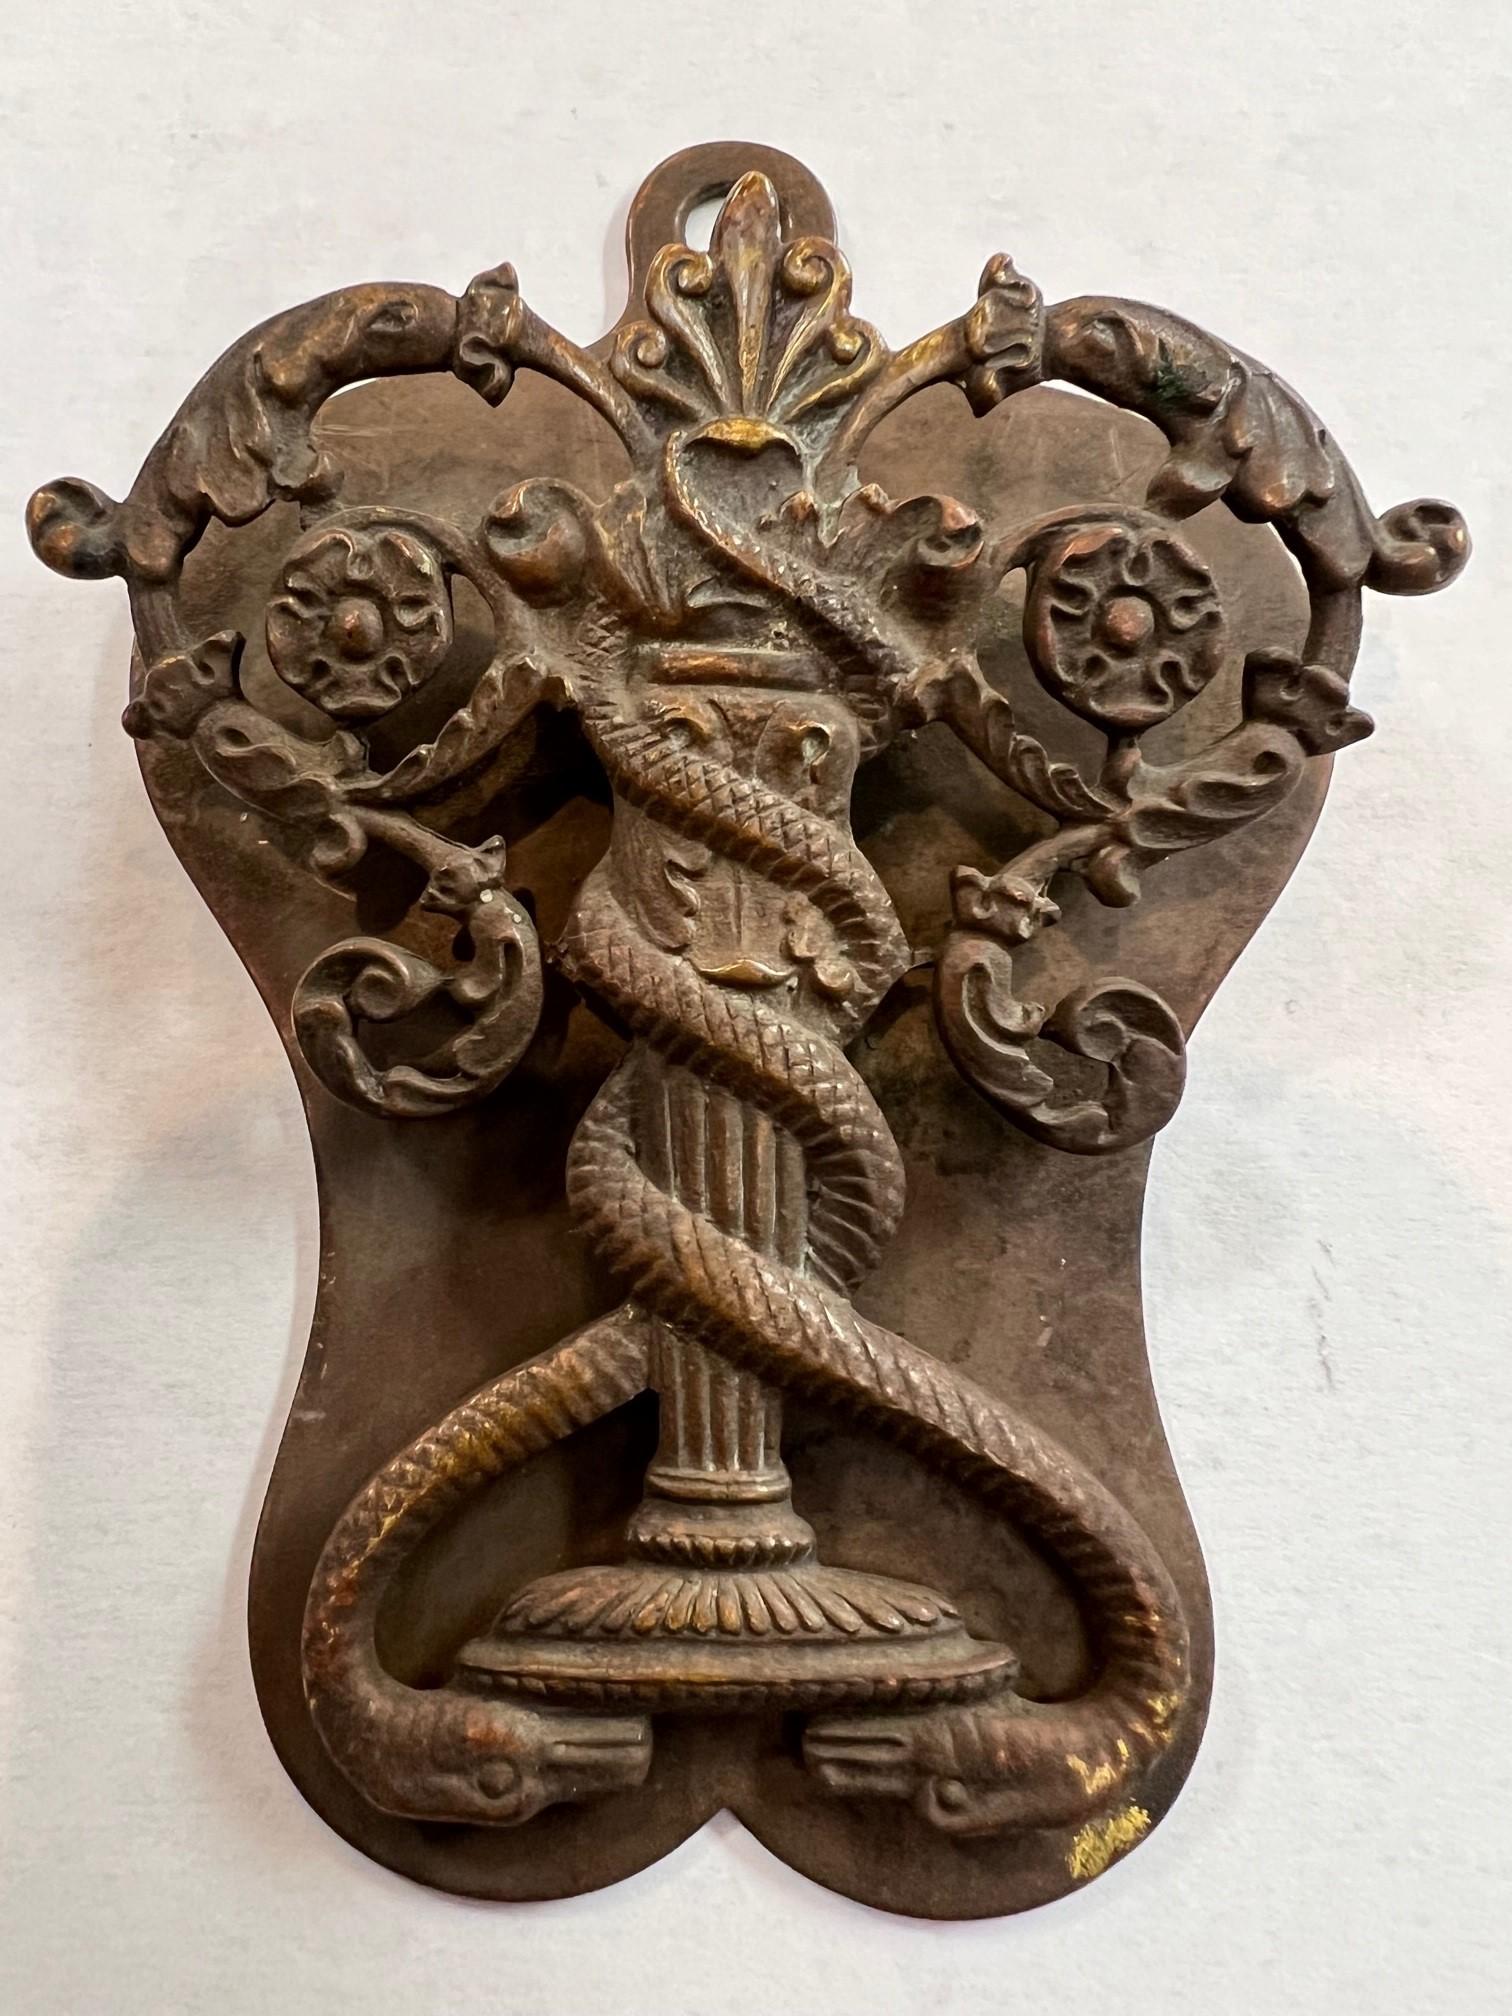 Antique brass letter or envelope holder with two snakes wrapped around a fountain, birdbath or column. Not sure the meaning of it, but it does make you think the symbol for medicine. Snakes are considered to represent healing and can be found